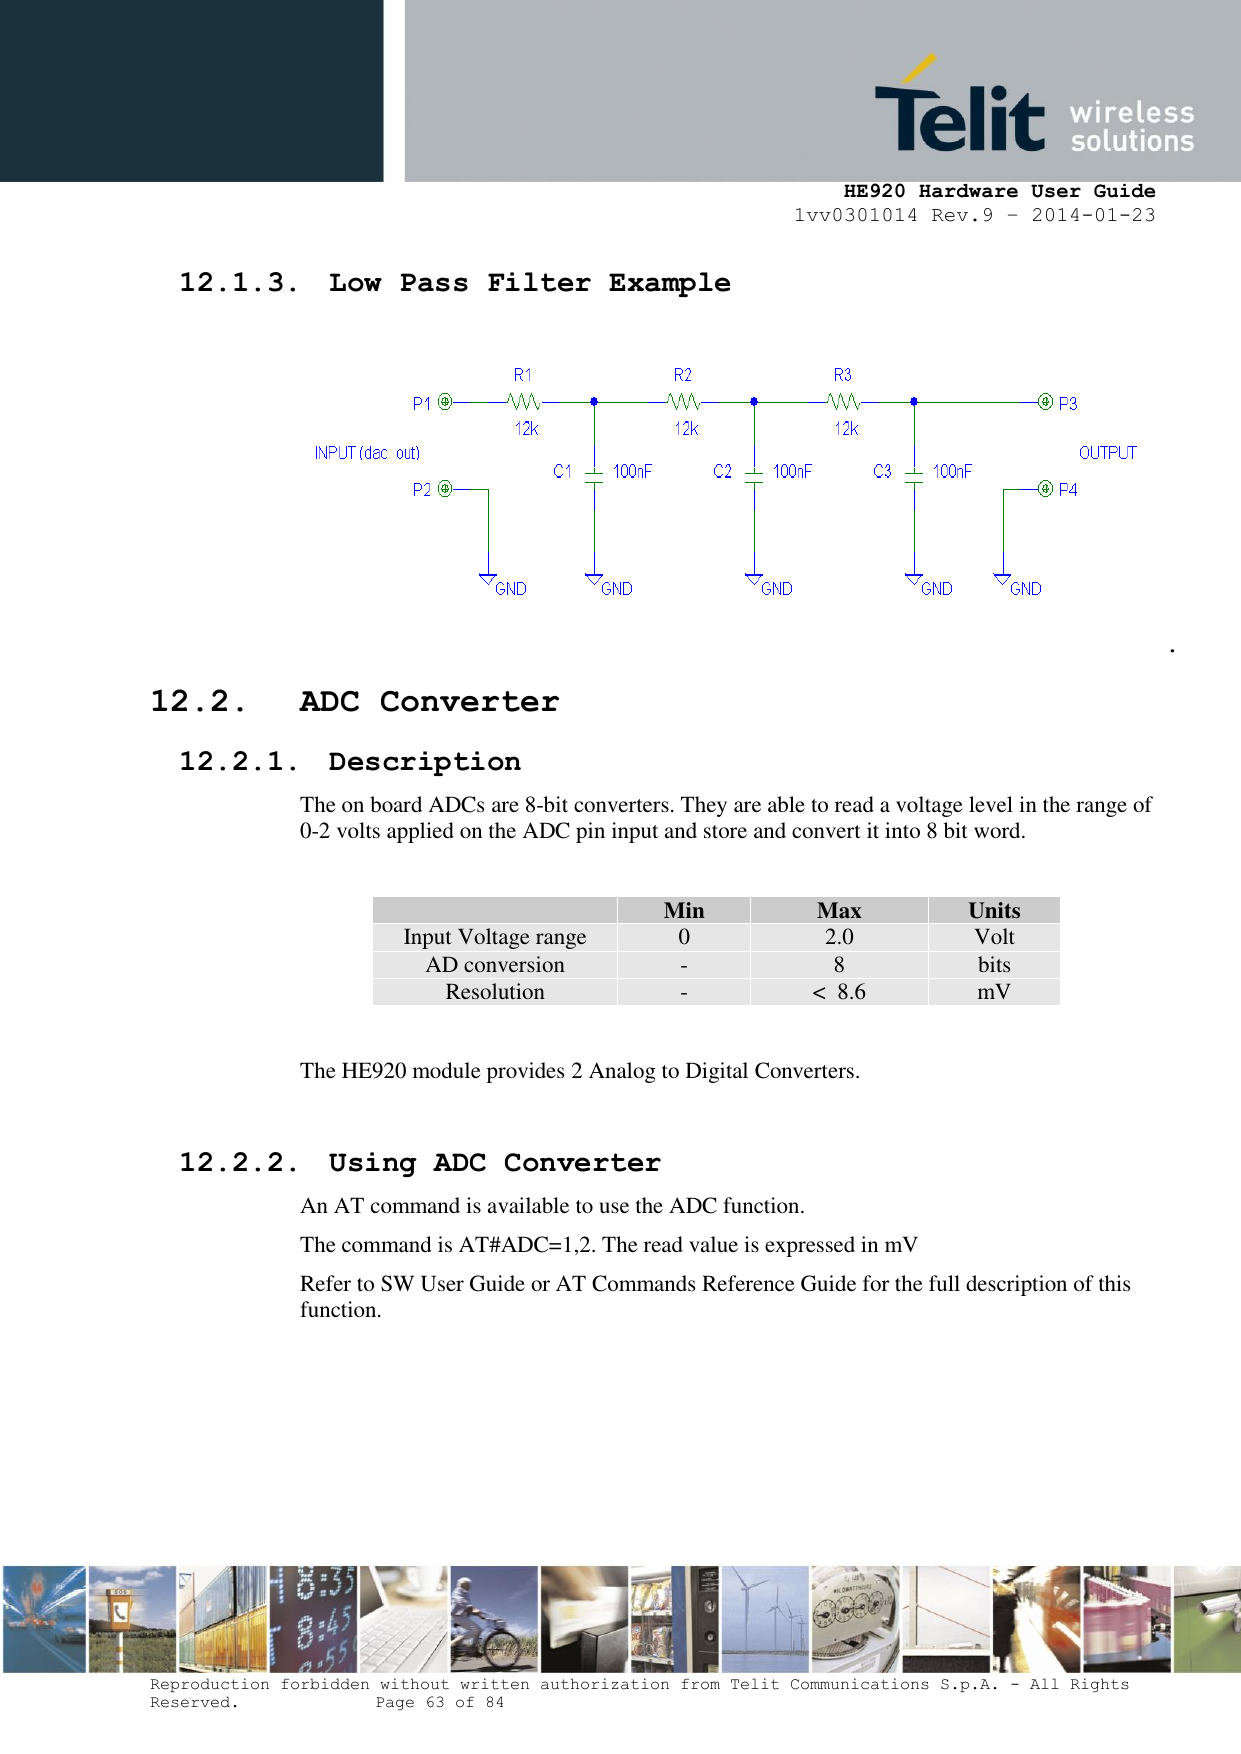     HE920 Hardware User Guide 1vv0301014 Rev.9 – 2014-01-23 Reproduction forbidden without written authorization from Telit Communications S.p.A. - All Rights Reserved.    Page 63 of 84  12.1.3. Low Pass Filter Example .  12.2. ADC Converter 12.2.1. Description The on board ADCs are 8-bit converters. They are able to read a voltage level in the range of 0-2 volts applied on the ADC pin input and store and convert it into 8 bit word.   Min Max Units Input Voltage range 0 2.0 Volt AD conversion - 8 bits Resolution - &lt;  8.6 mV  The HE920 module provides 2 Analog to Digital Converters.   12.2.2. Using ADC Converter An AT command is available to use the ADC function.  The command is AT#ADC=1,2. The read value is expressed in mV Refer to SW User Guide or AT Commands Reference Guide for the full description of this function.  